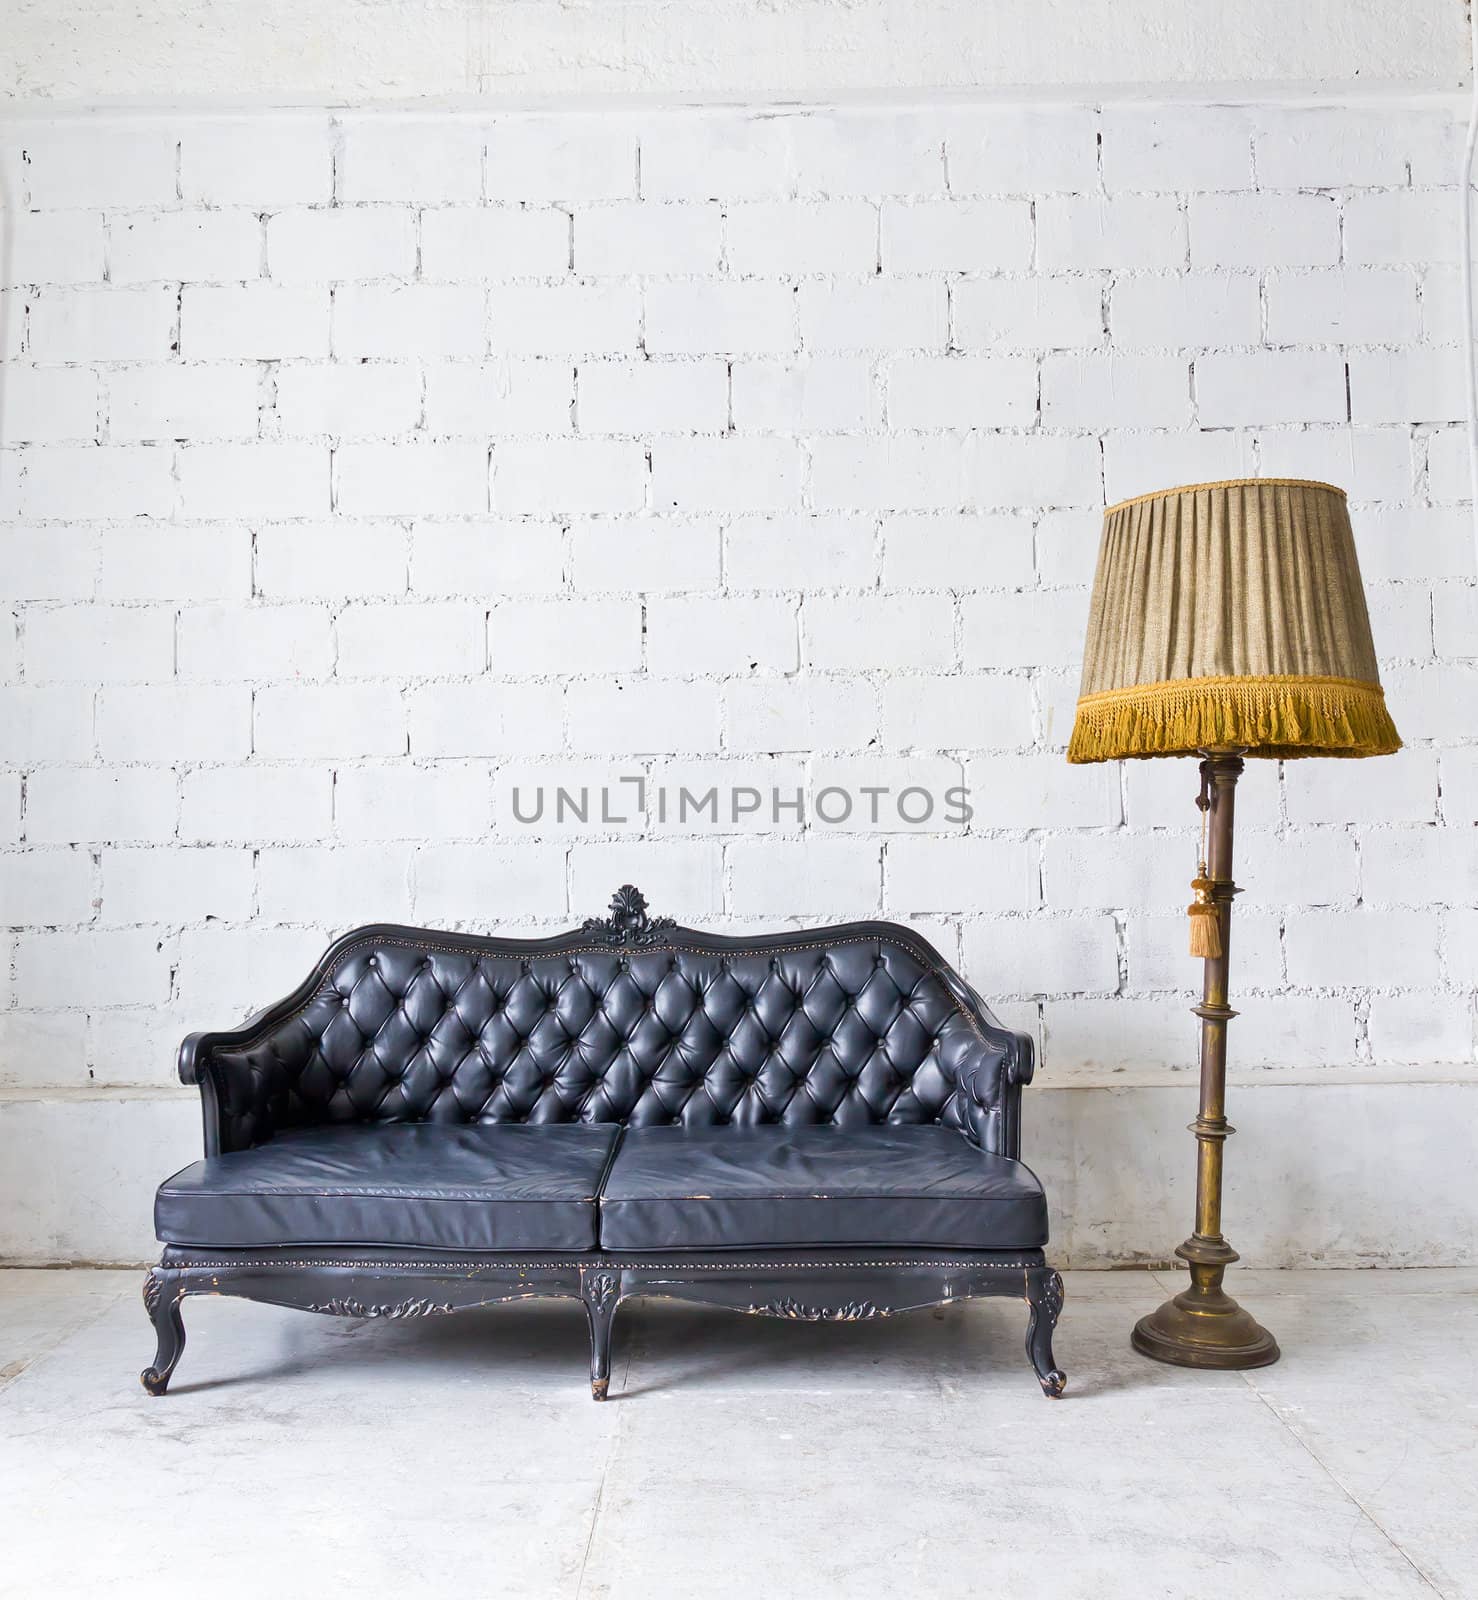 vintage luxury armchair in white room  by tungphoto